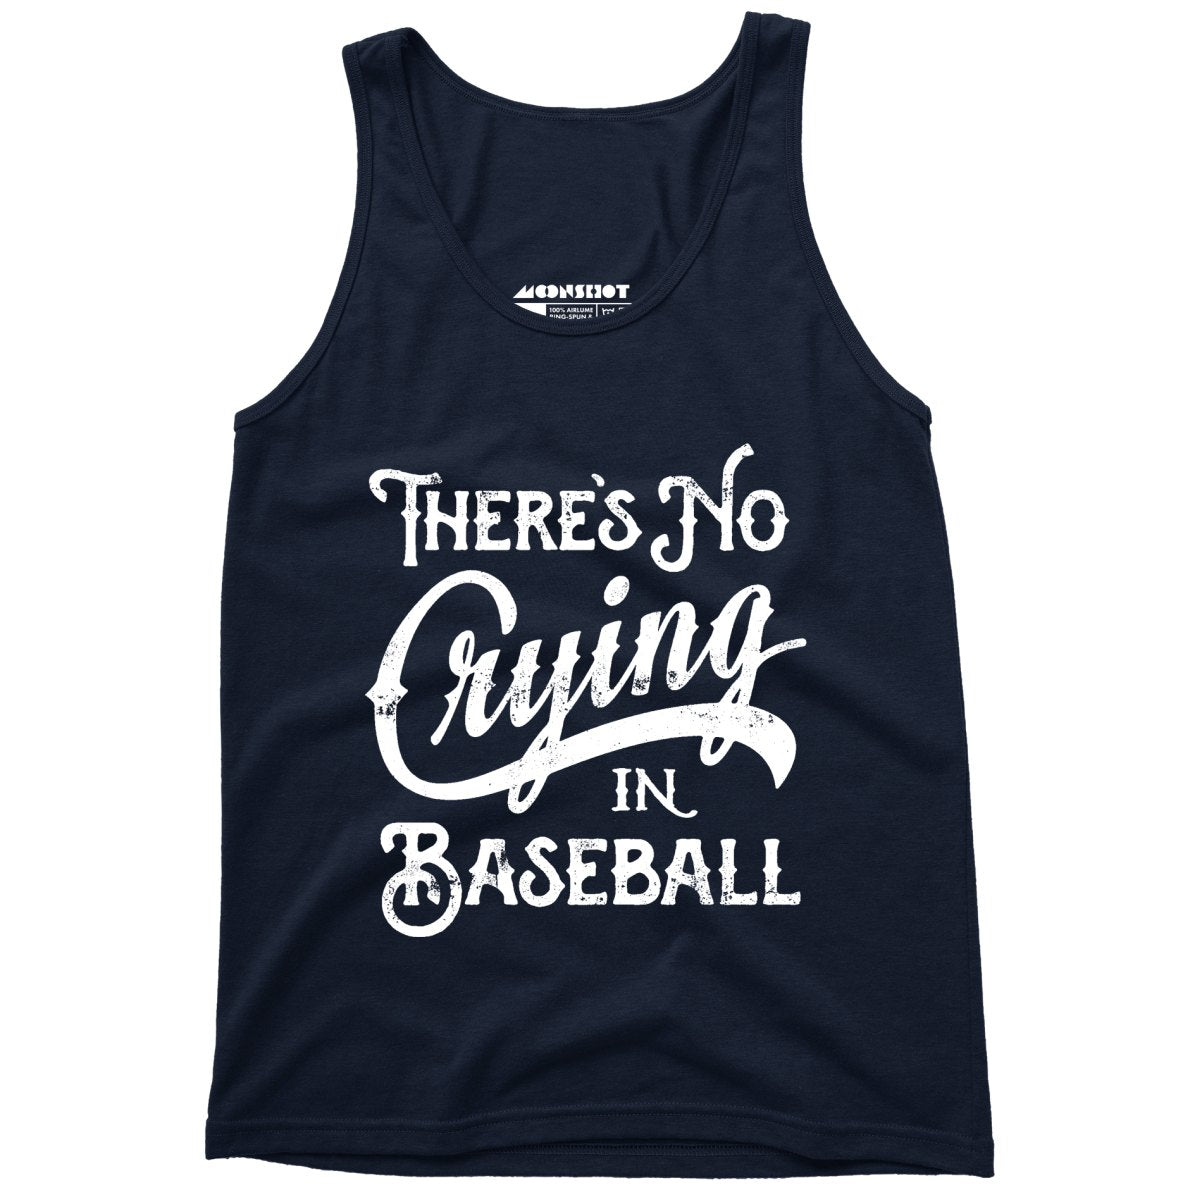 There's No Crying in Baseball - Unisex Tank Top